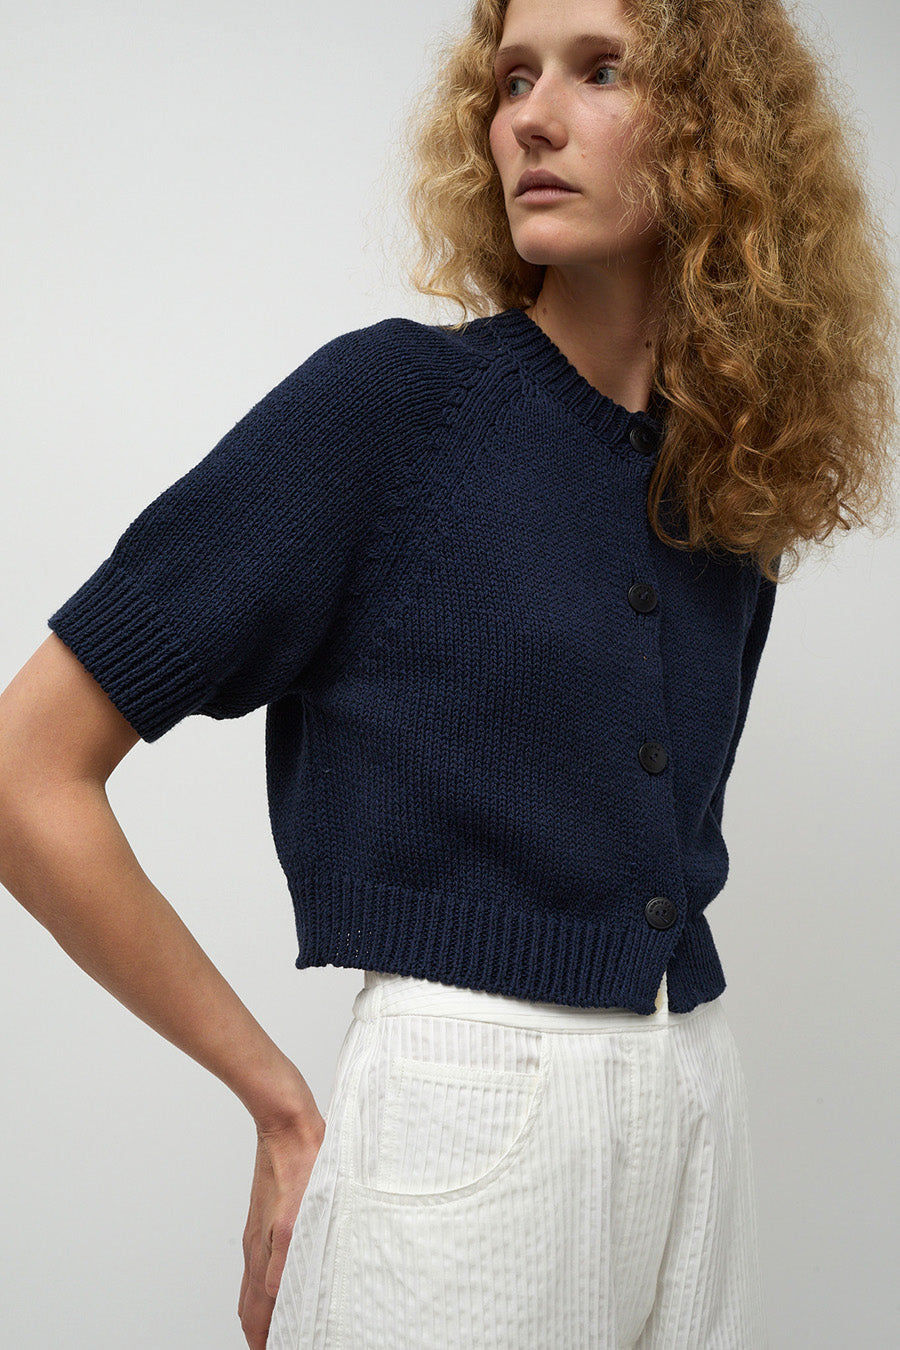 CORDERA Cotton Button Up Top in Navy